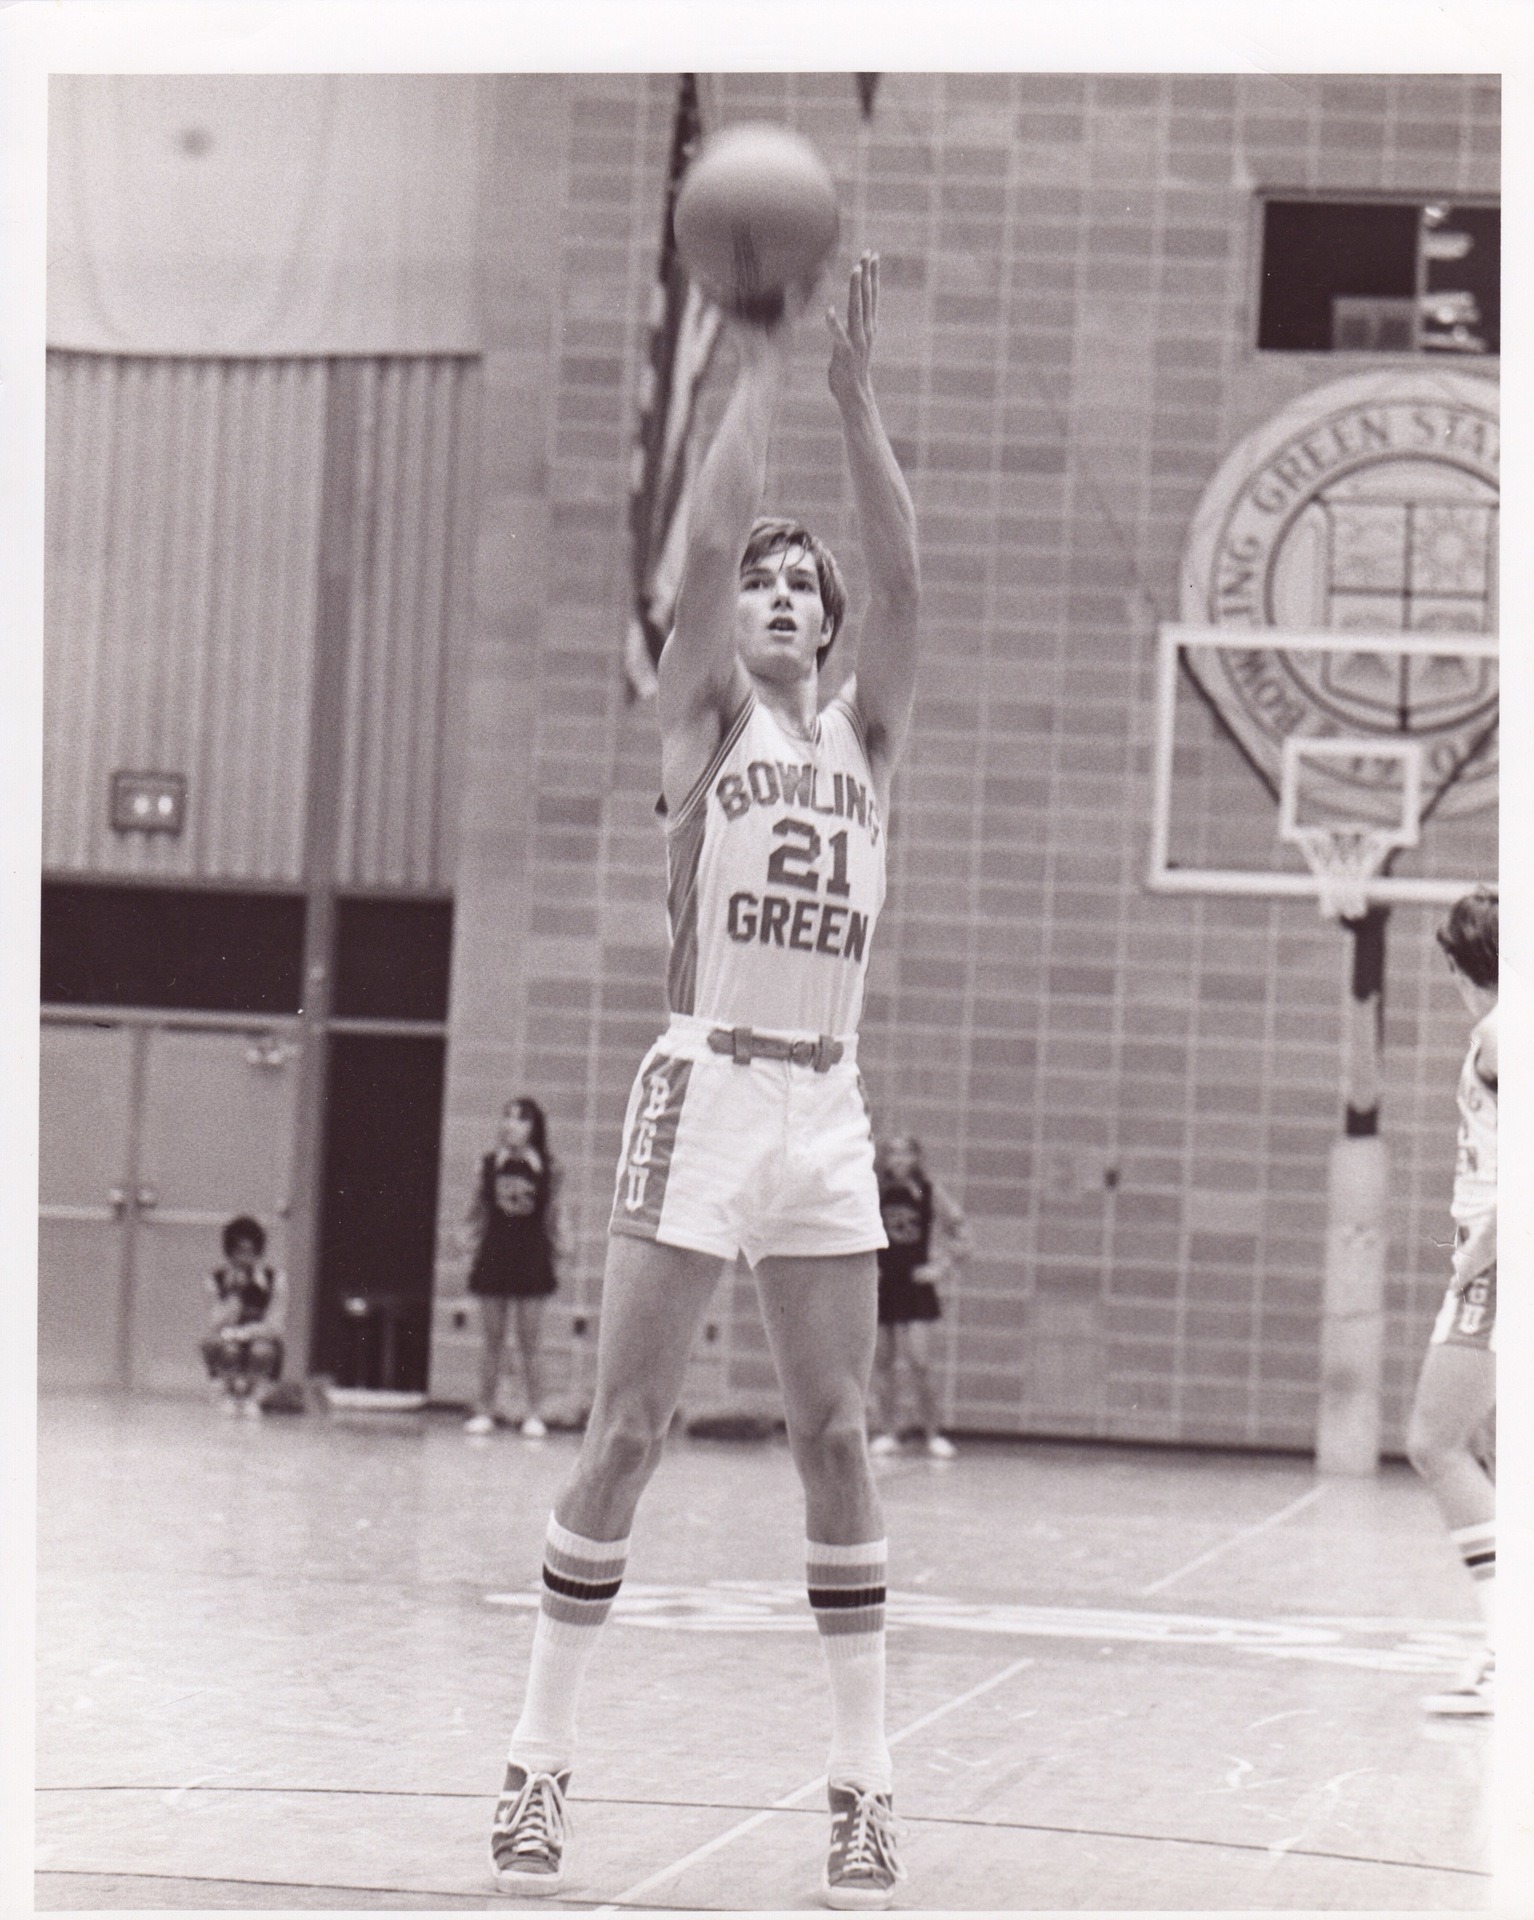 Jeff Lessig '73 was a two-sport athlete during his time at BGSU, playing basketball and baseball.